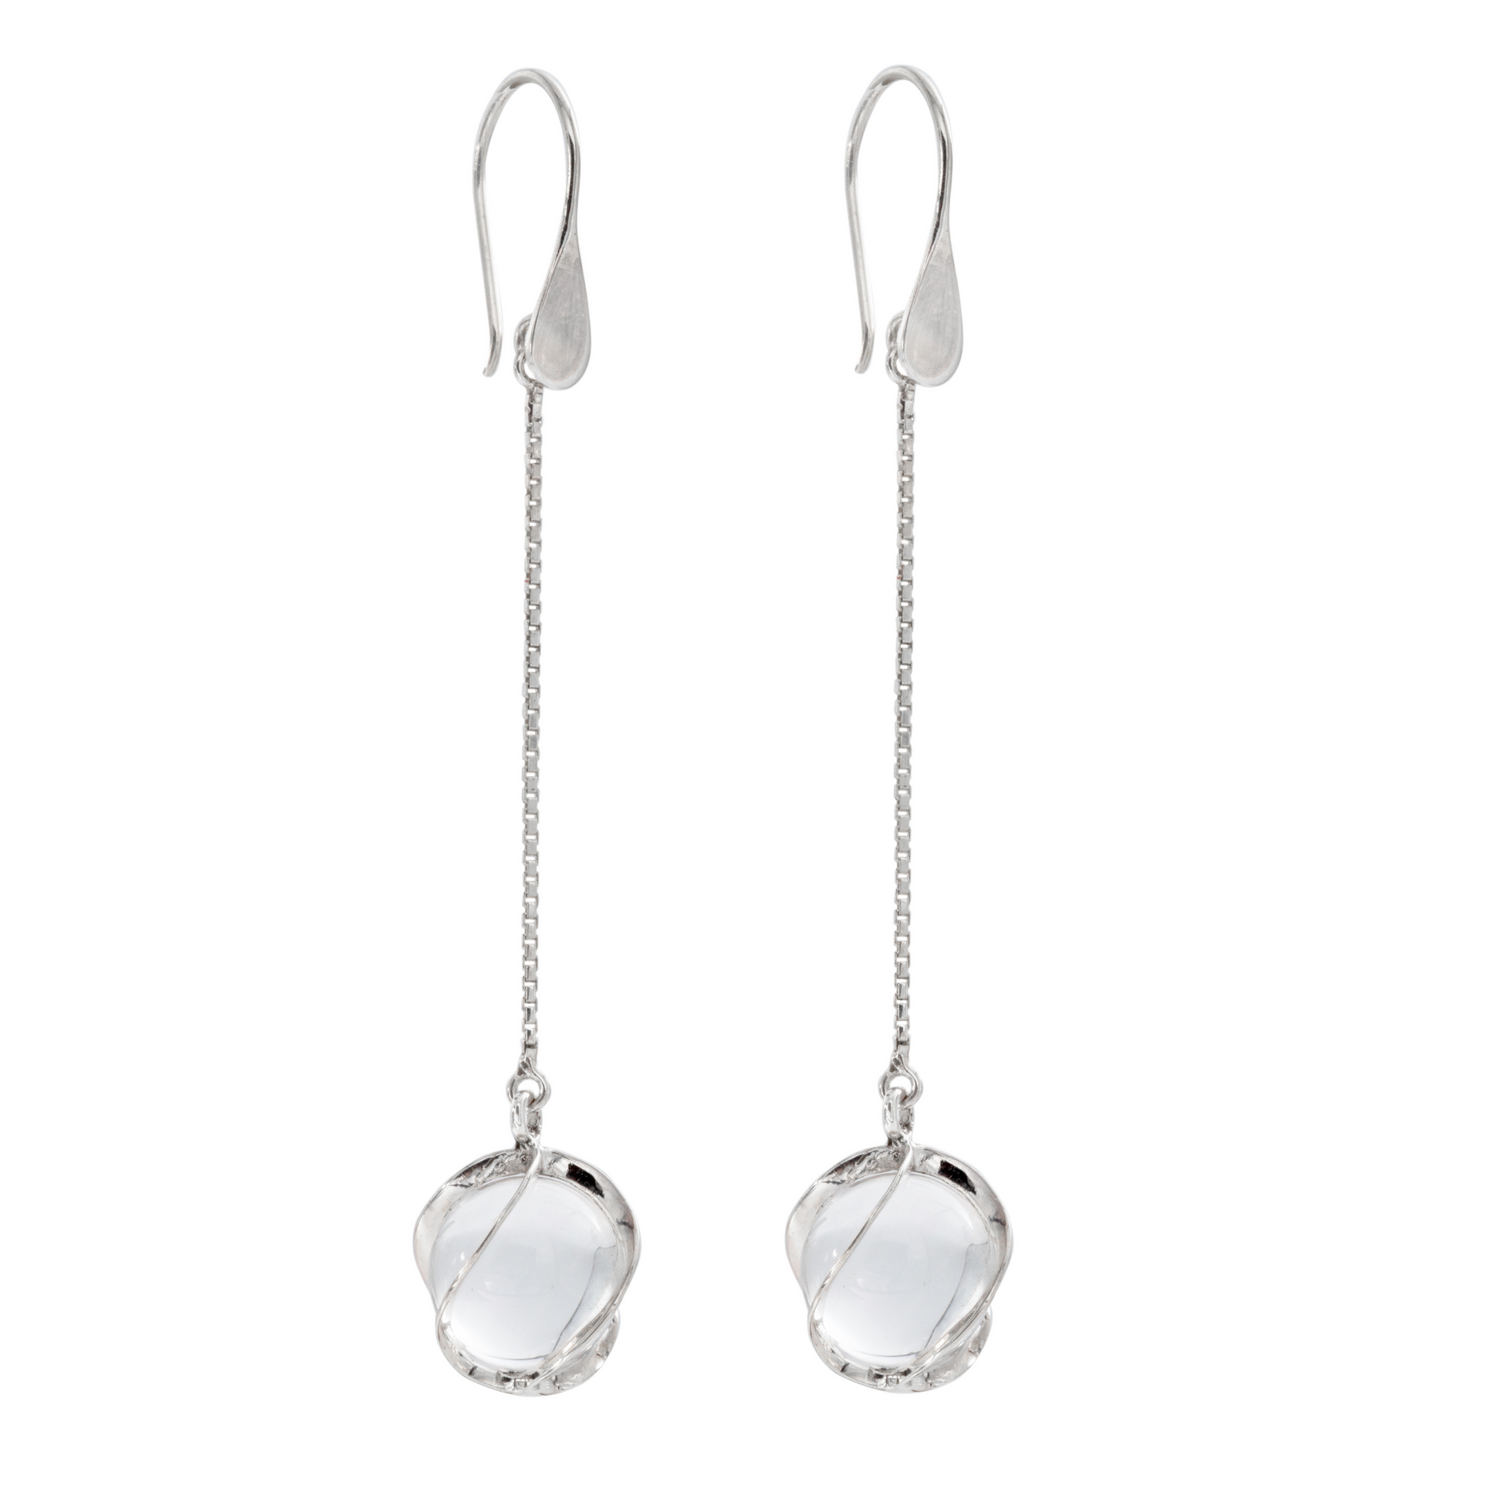 Get your hands on elegant Wave Crystal Earhooks – The perfect accessory for any occasion.